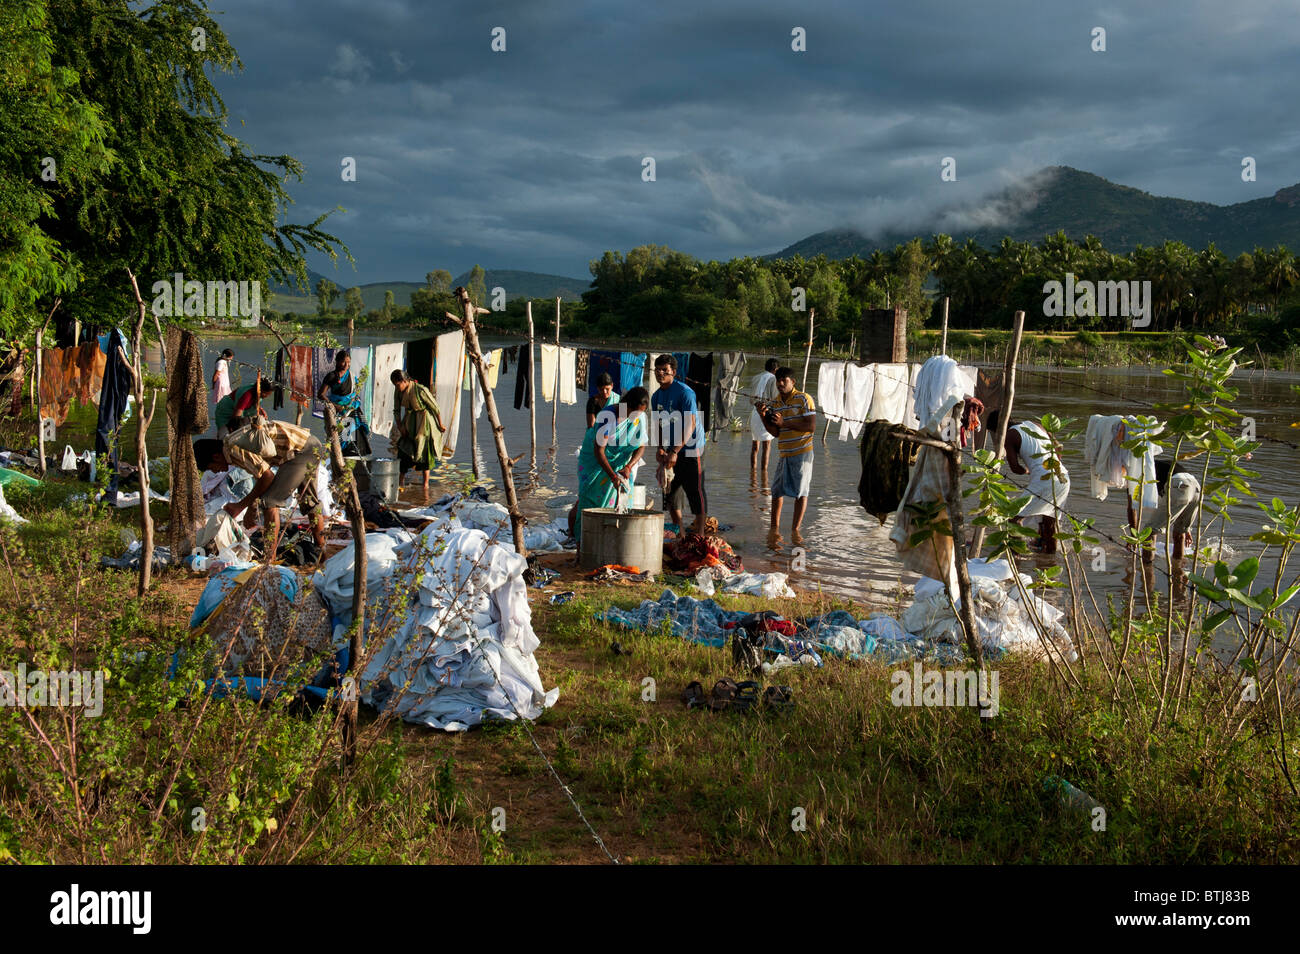 Indian people washing clothes by a flooded river in the town of Puttaparthi, Andhra Pradesh, India Stock Photo